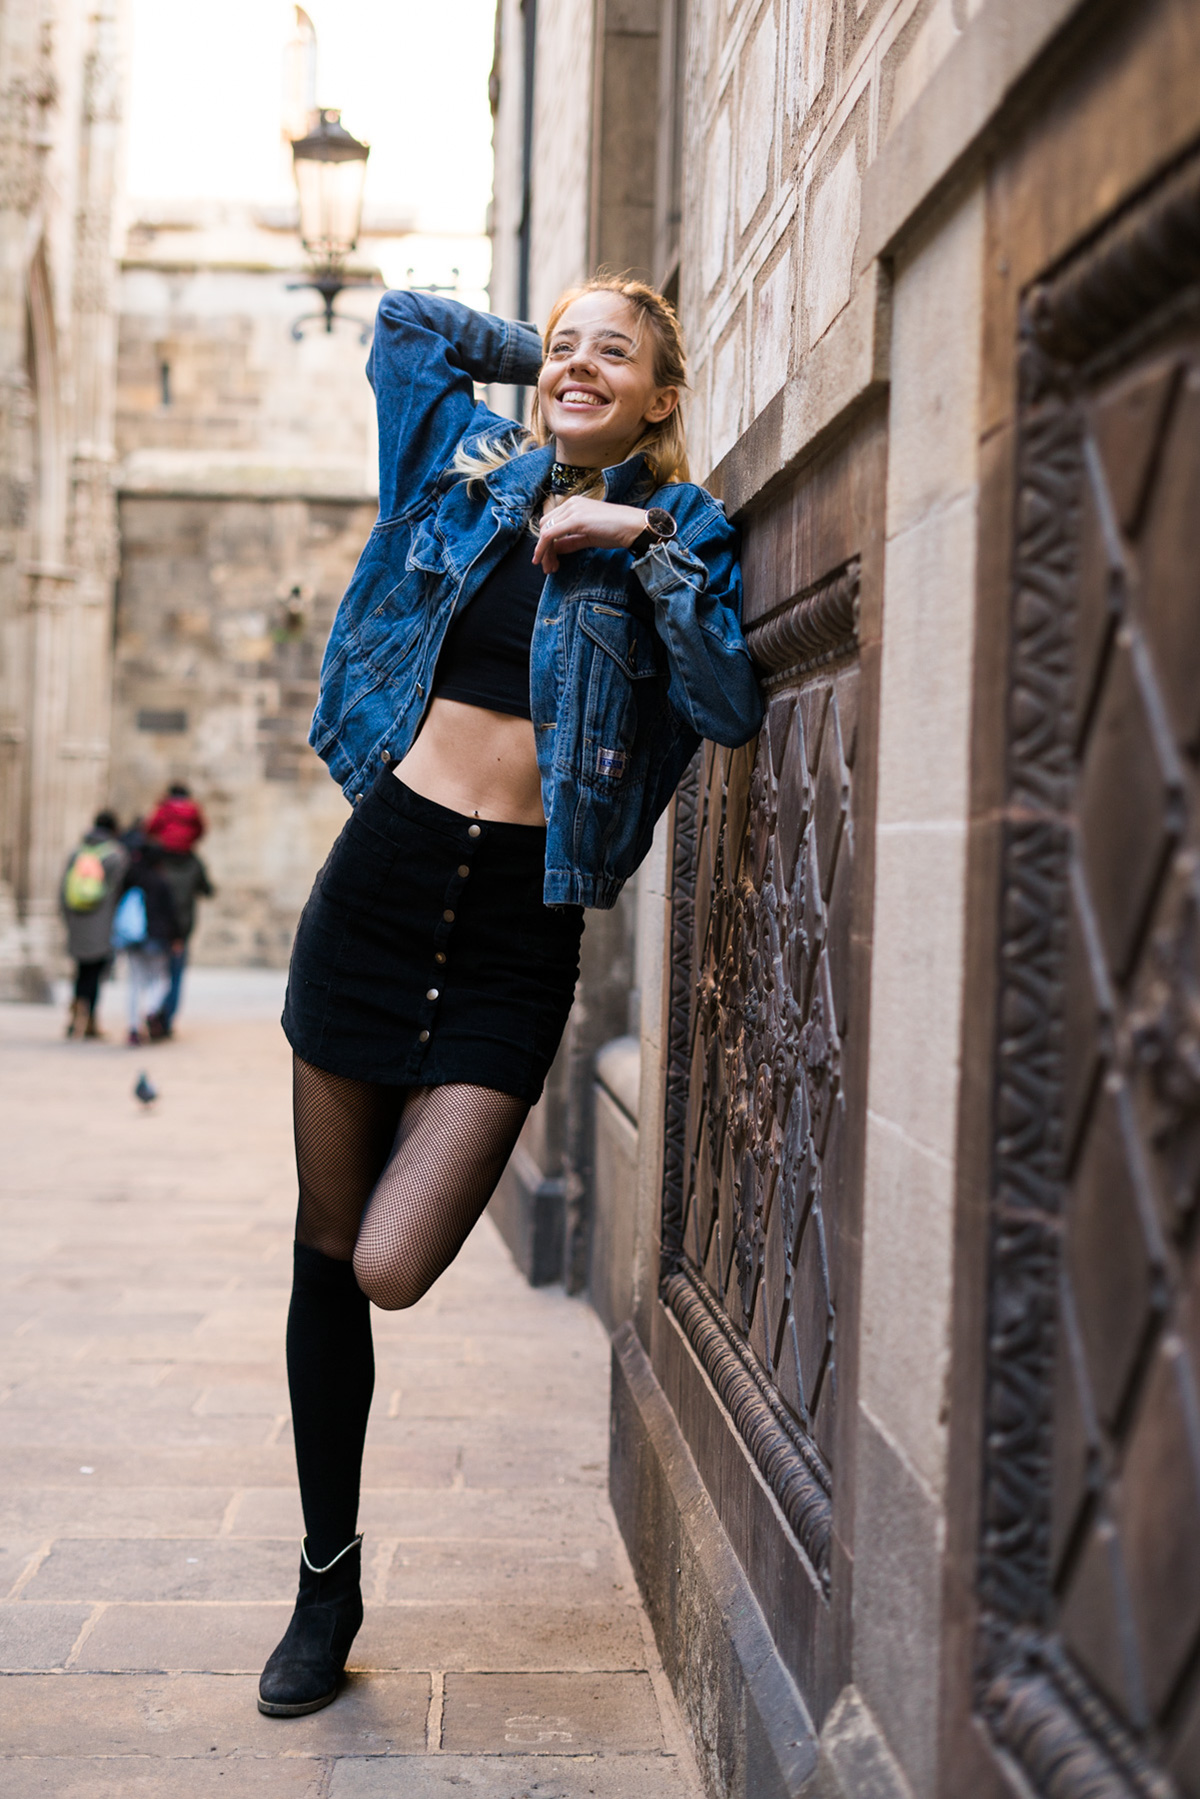 lifestyle barcelona streets natural happiness lifestyle model girl Young pretty